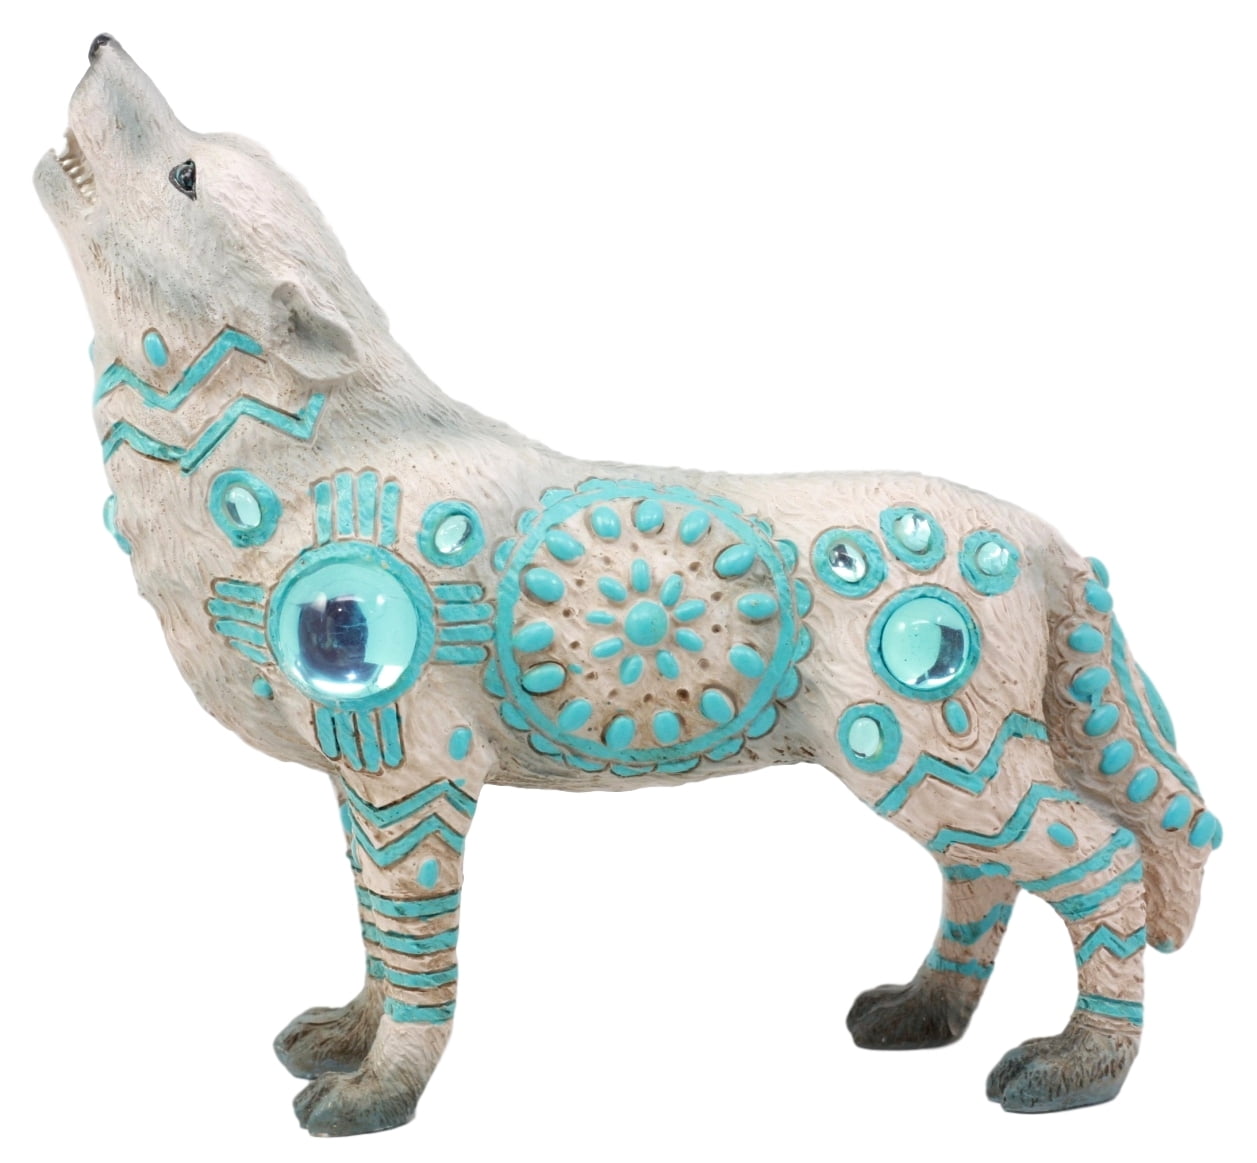 The Wolf Spirit Collection Homage to the Chief Wolf Spirit Collectible Figurine